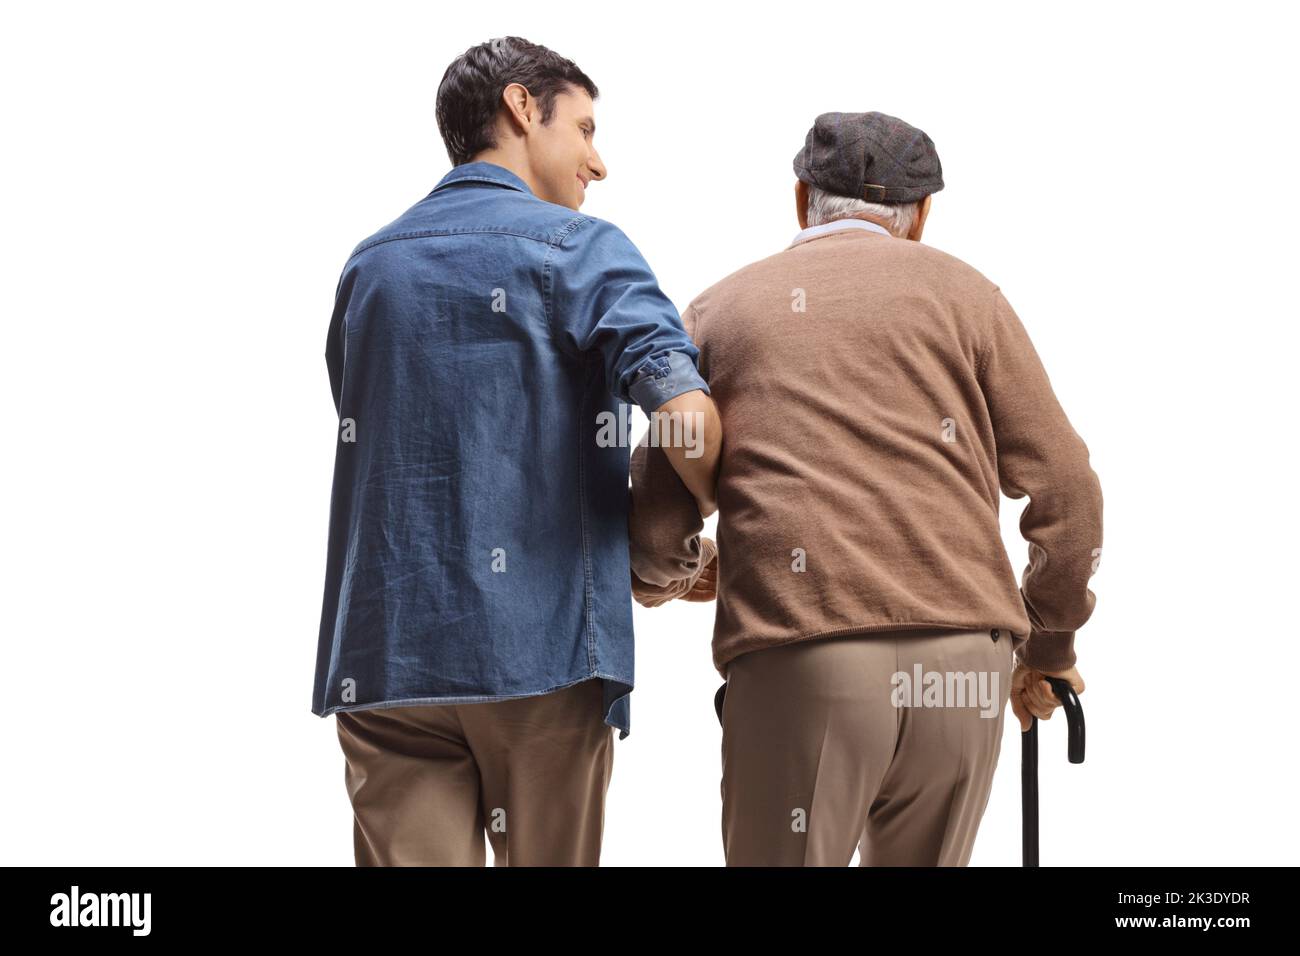 Rear view shot of a young man helping an elderly man with a walking cane isolated on white background Stock Photo